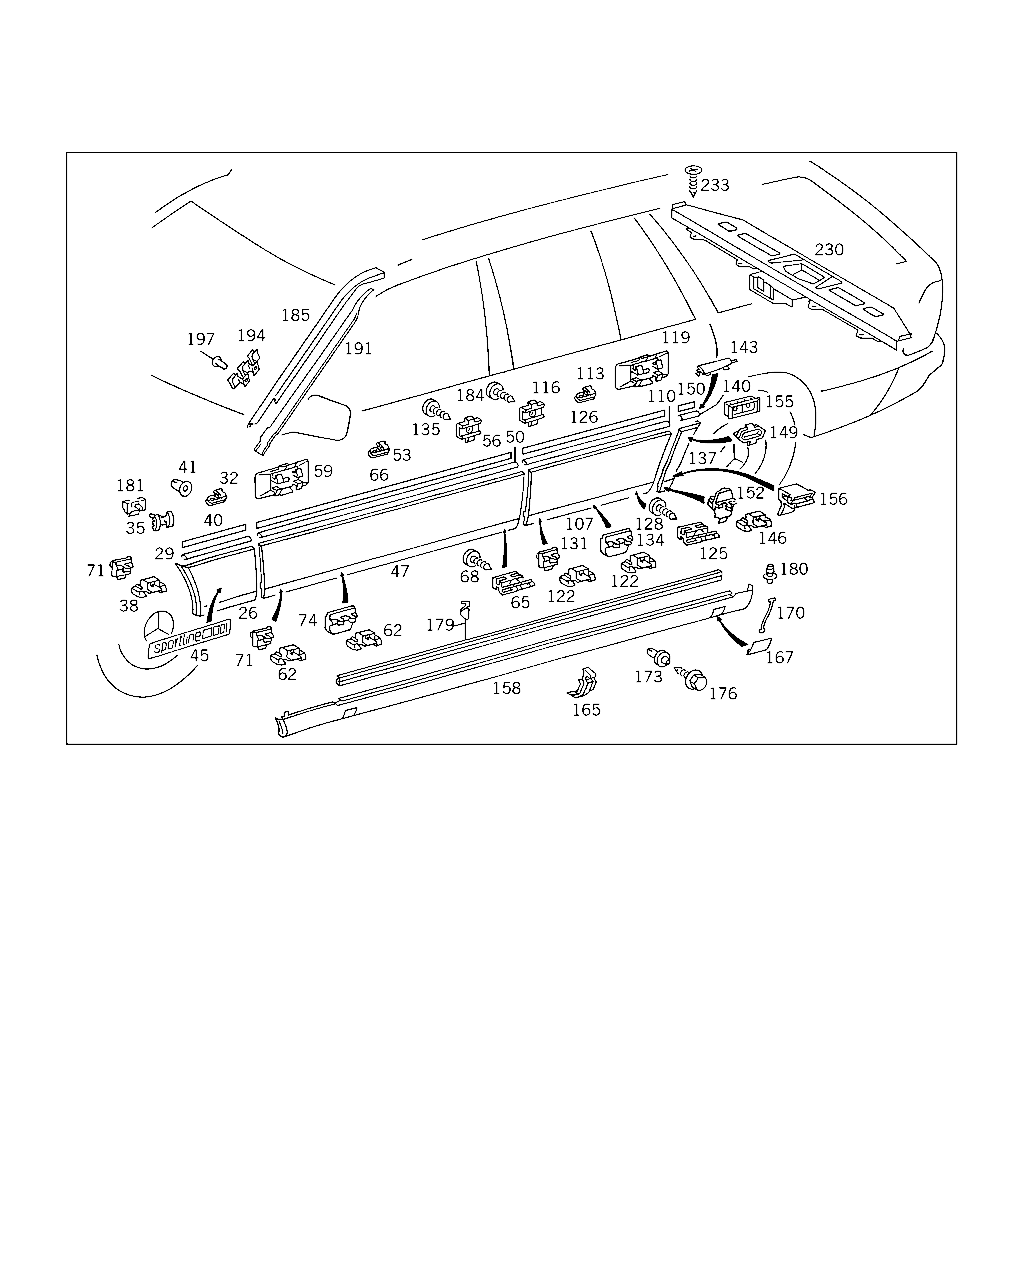 OUTSIDE ATTACHMENT PARTS [Car] MERCEDES [EUROPA] [CHASSIS]320